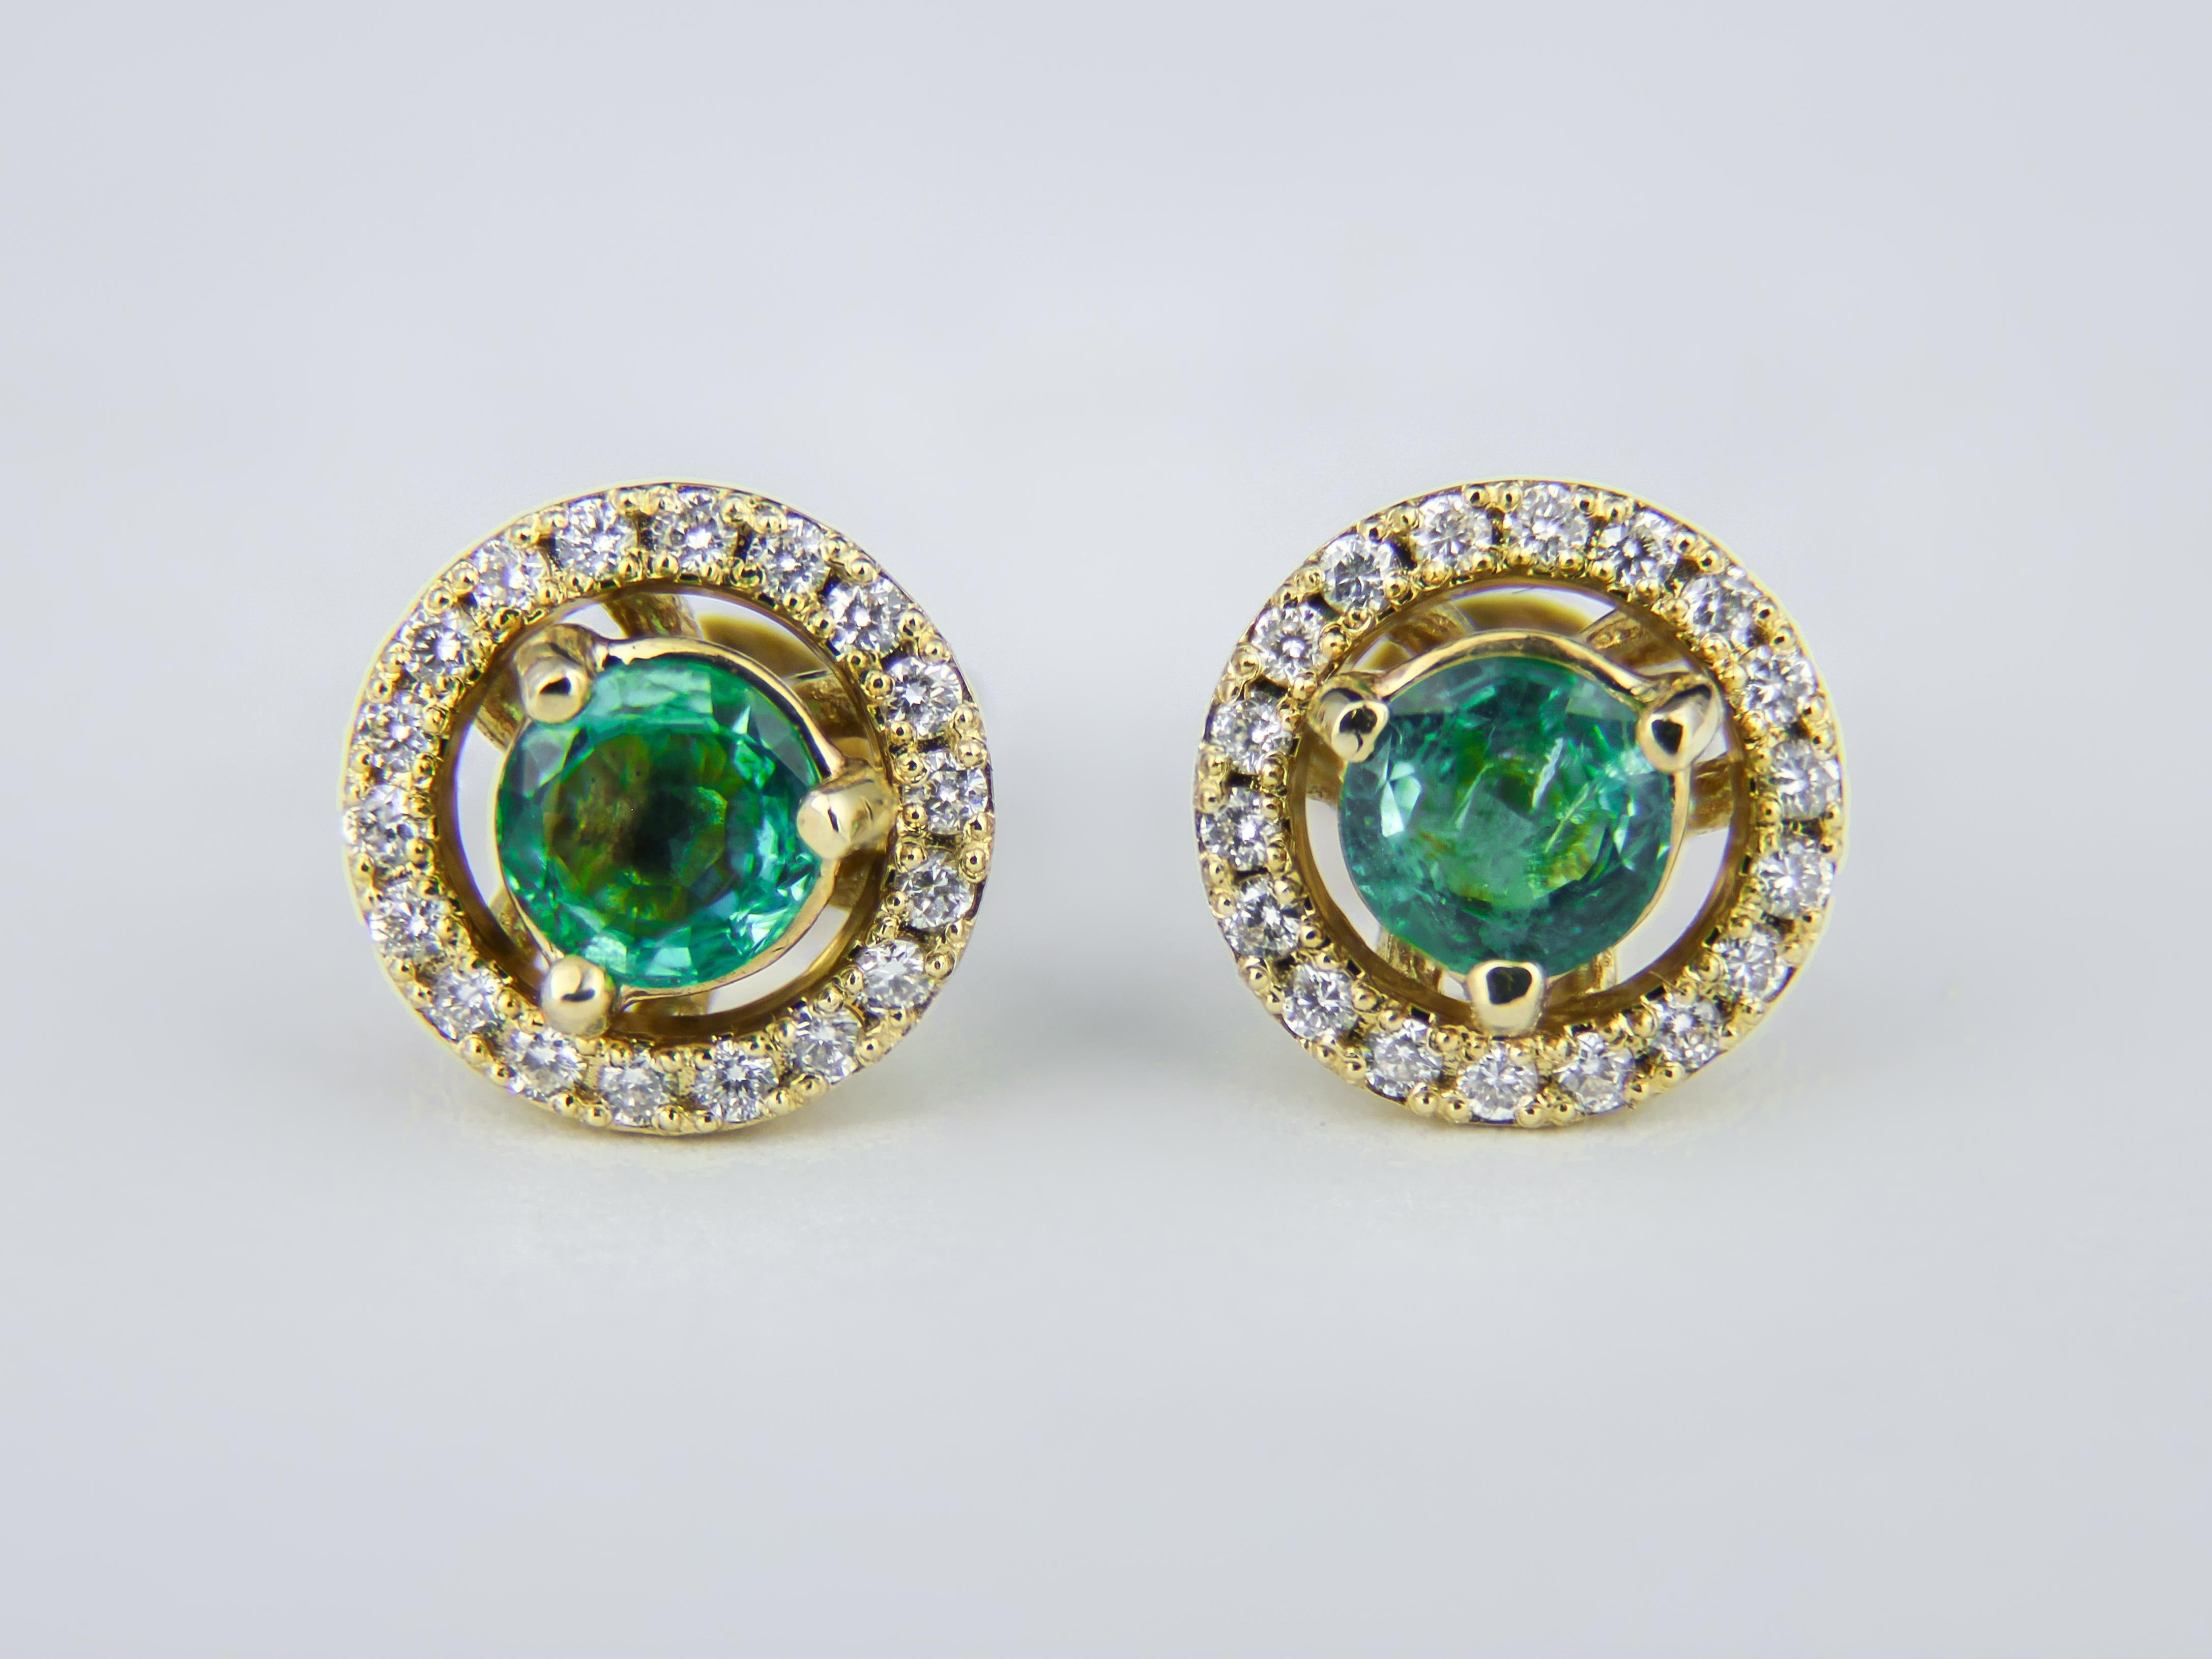 Modern Emeralds 14k Gold Earrings Studs, Removable Jackets Round Emerald Earrings For Sale